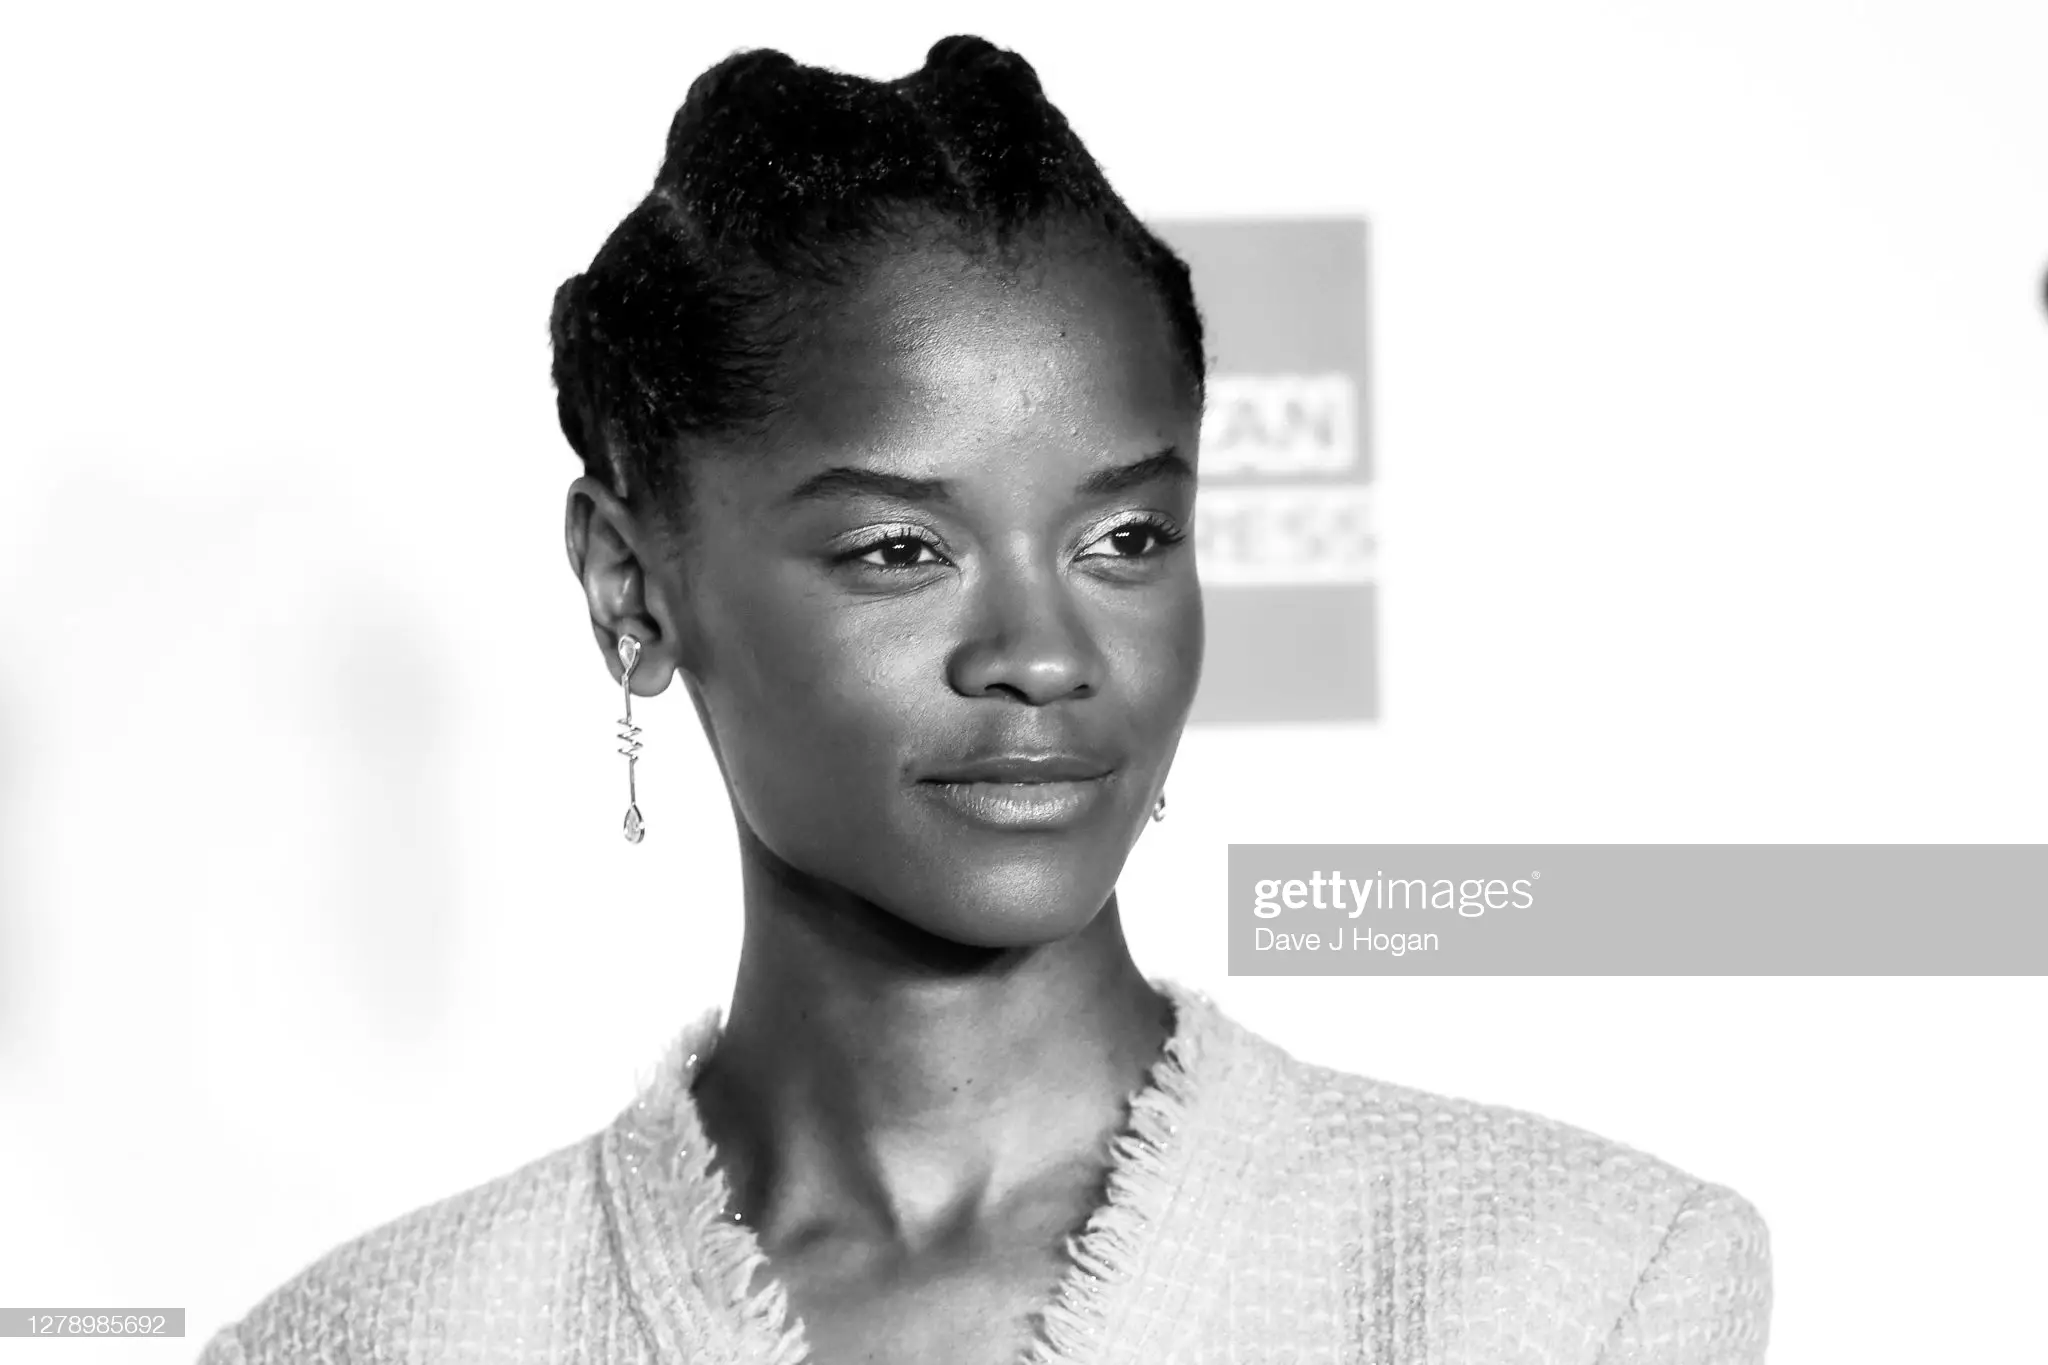 Letitia Wright attends the "Mangrove" opening